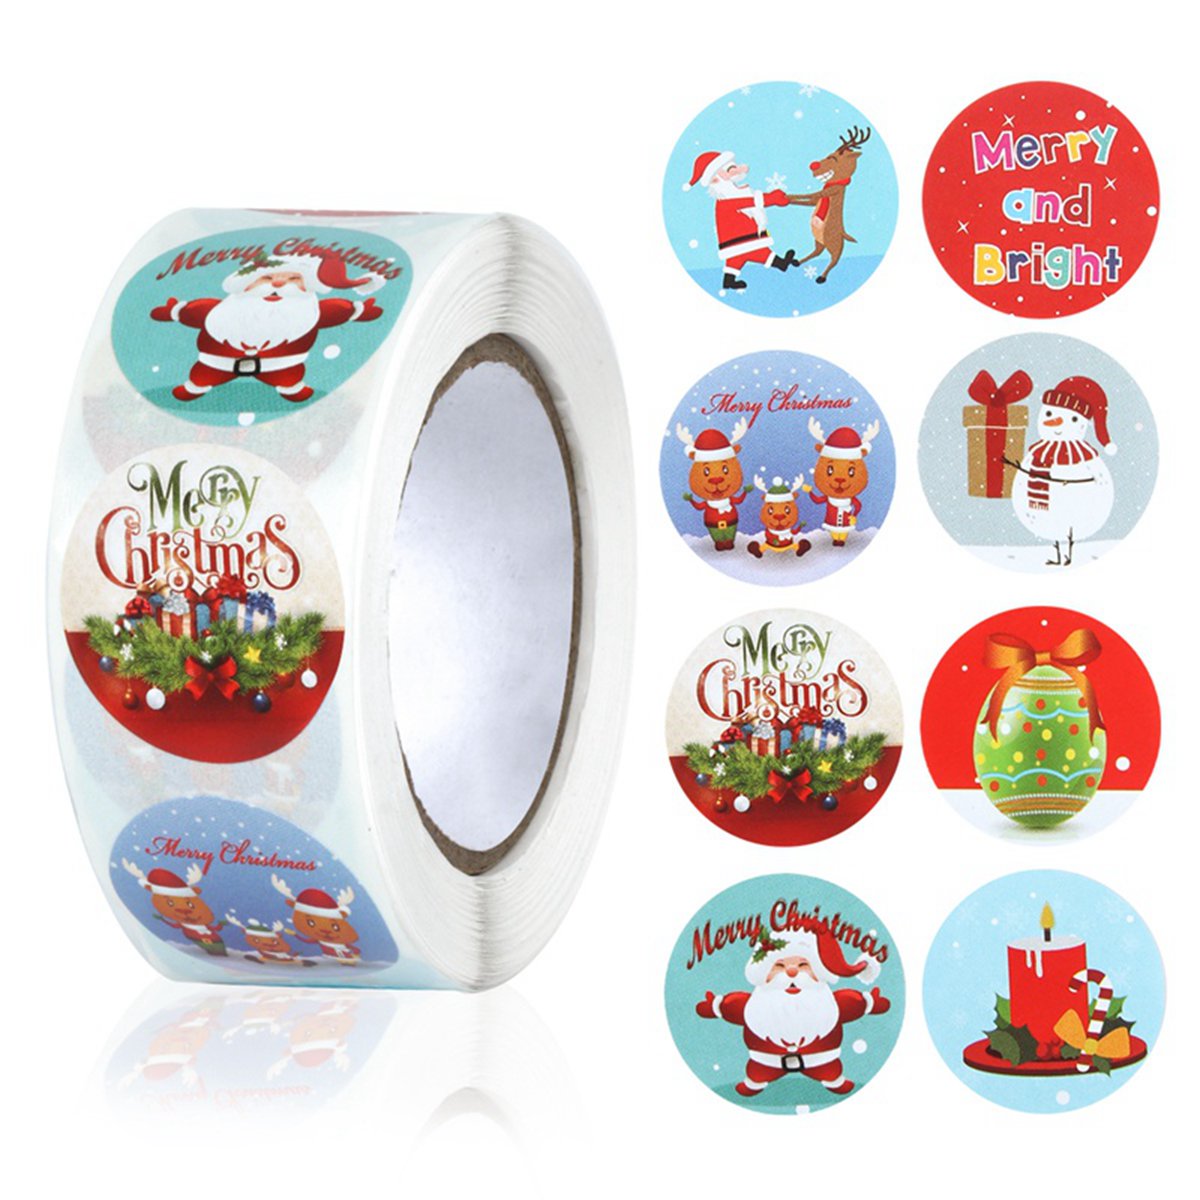 500pcs Christmas Stickers Candy Bag Decor Merry Christmas Decoration for Home 2022 Xmas Navidad Natal Noel Gifts New Year 2023